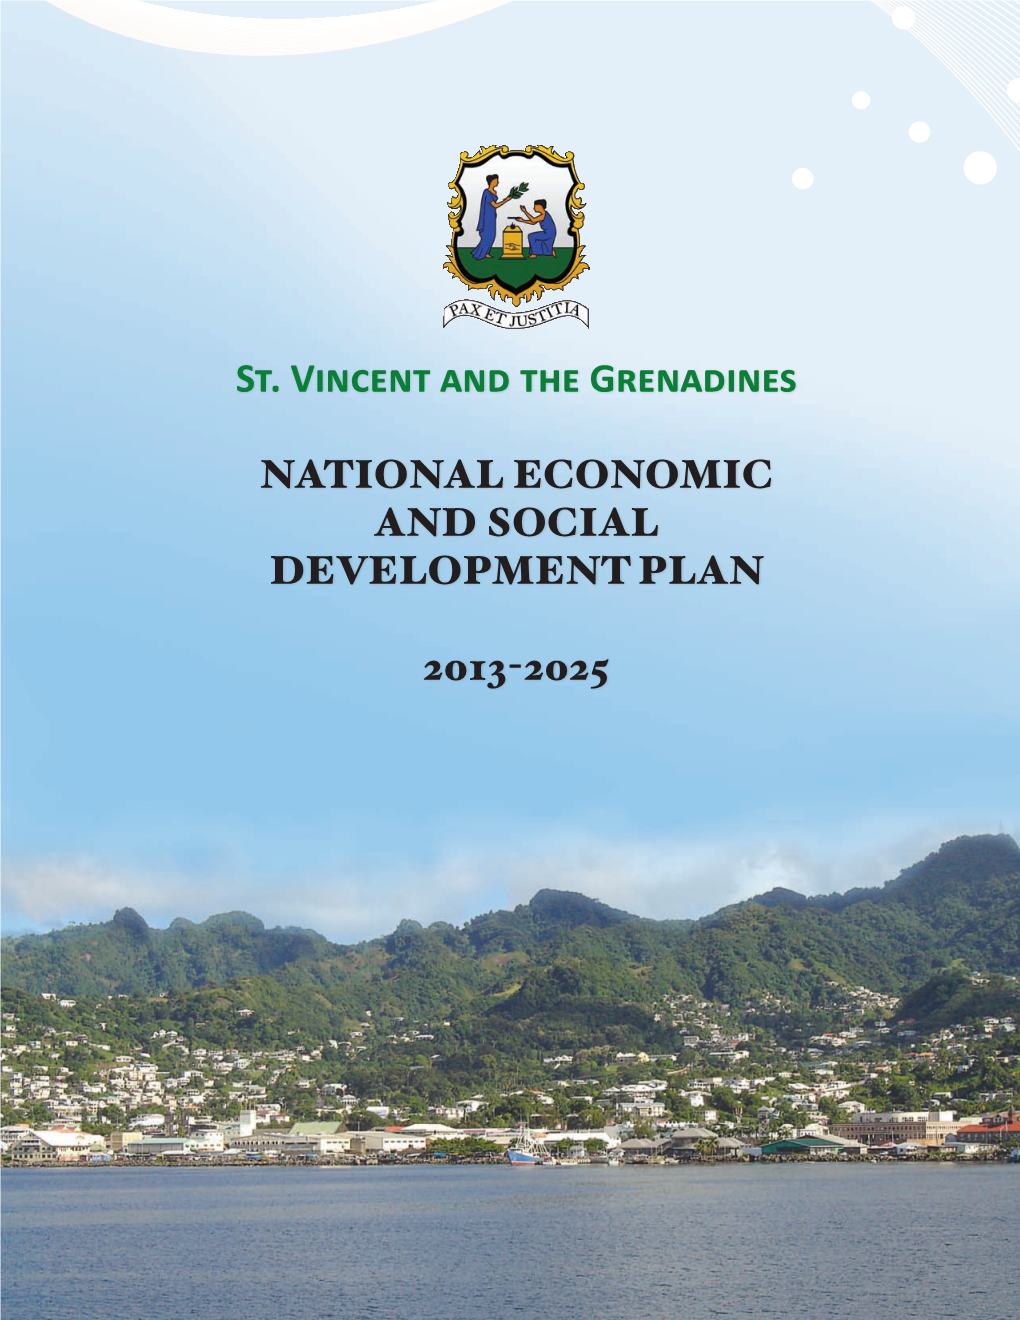 St. Vincent and the Grenadines • National Economic and Social Development Plan 2013-2025